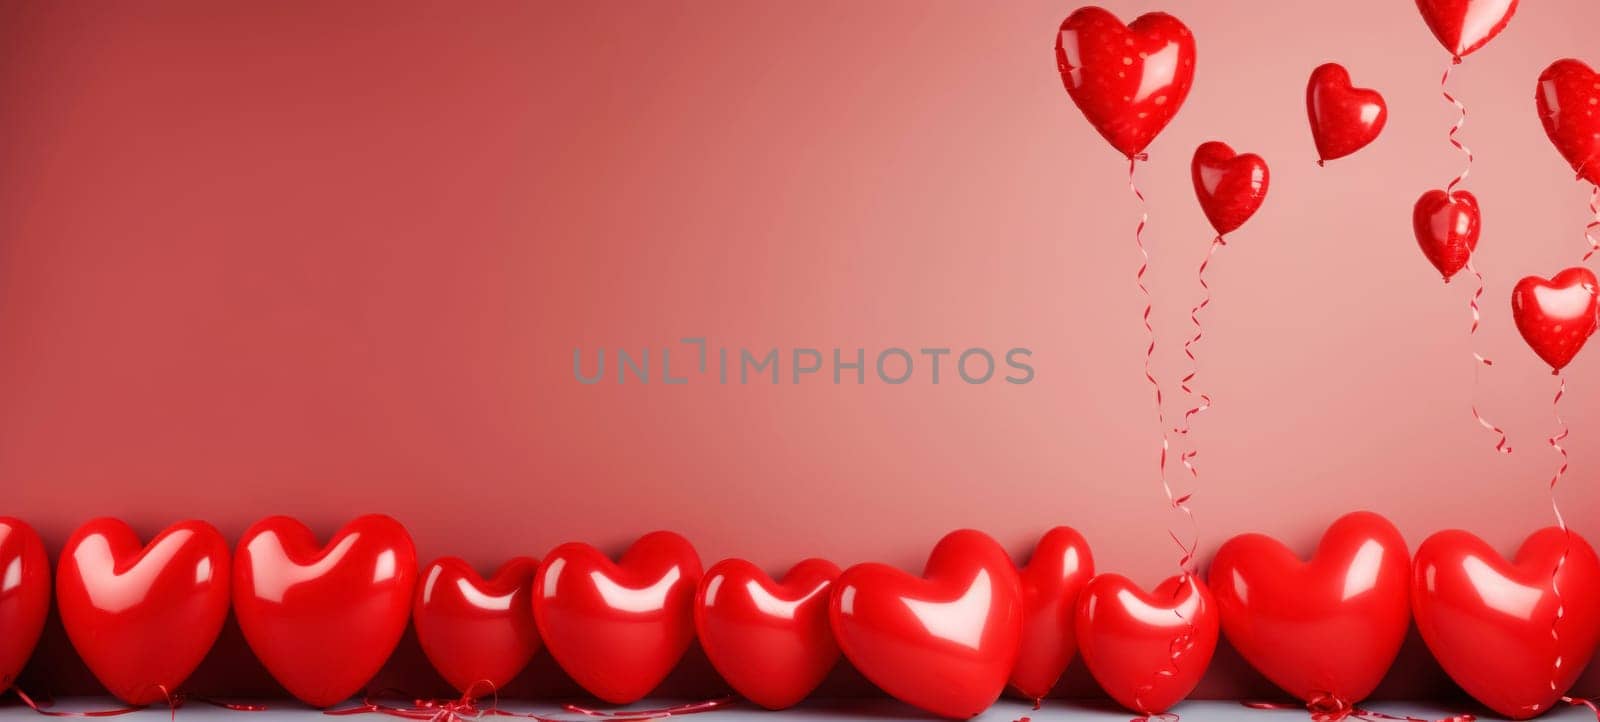 Red Heart Balloons Against Pink Background by andreyz